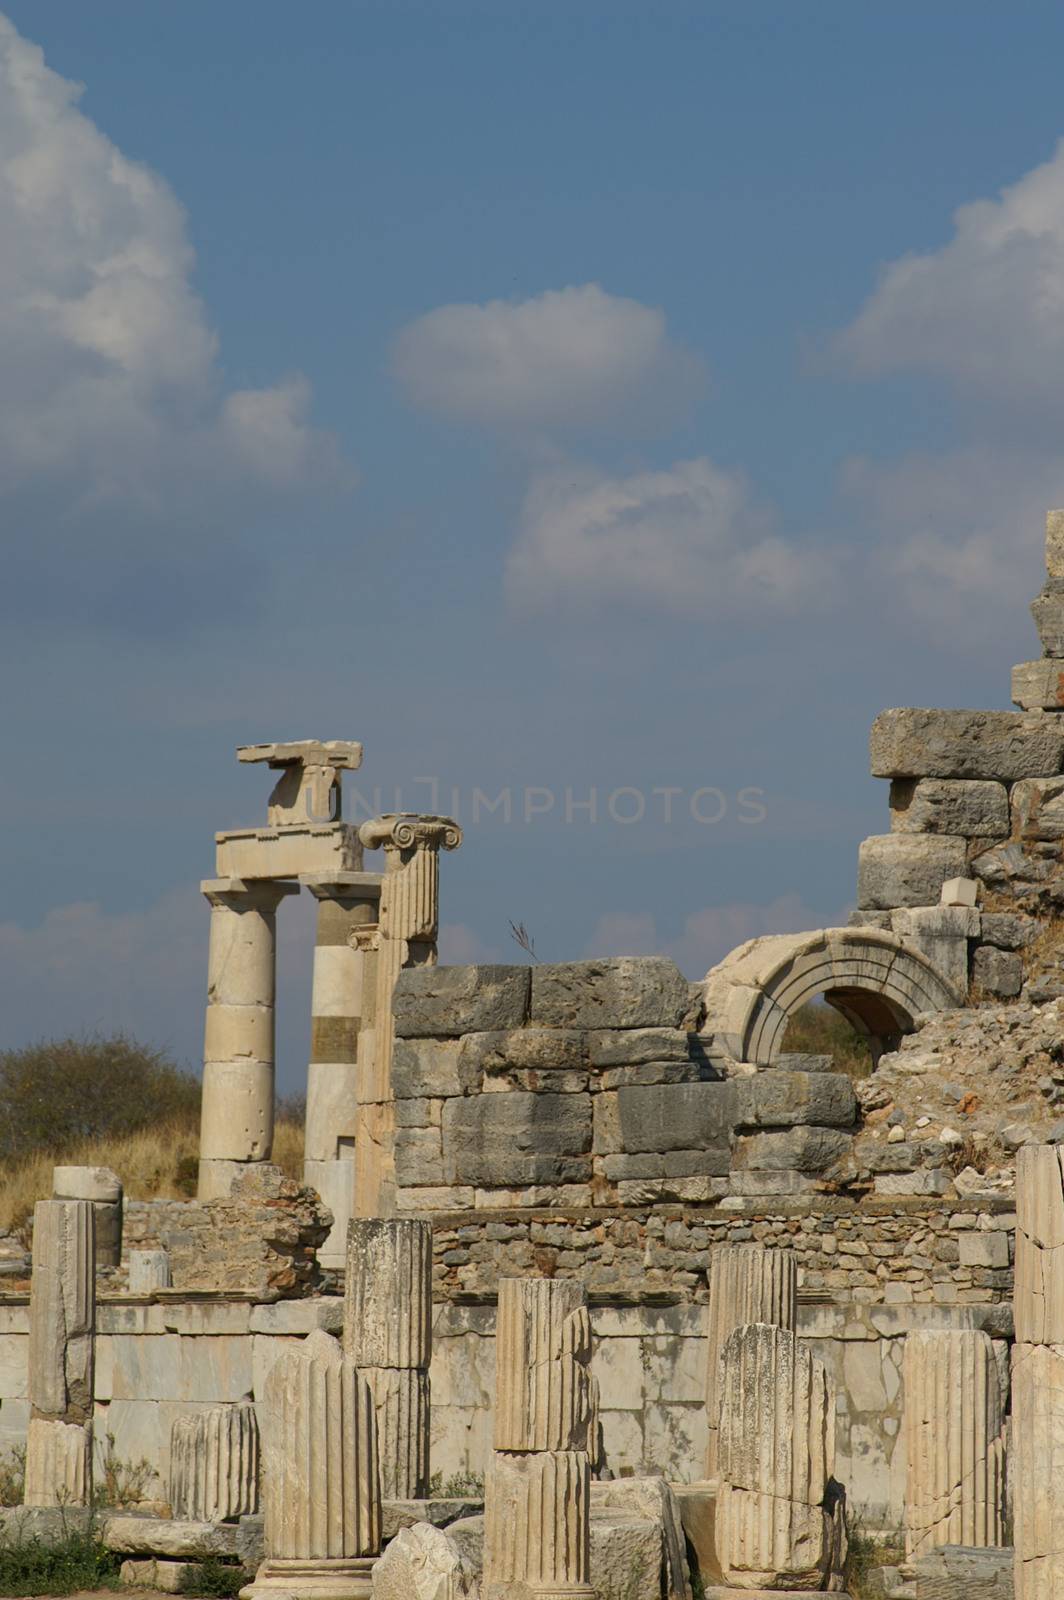 ancient ruins in Ephesus, Turkey - vacation and antique architecture